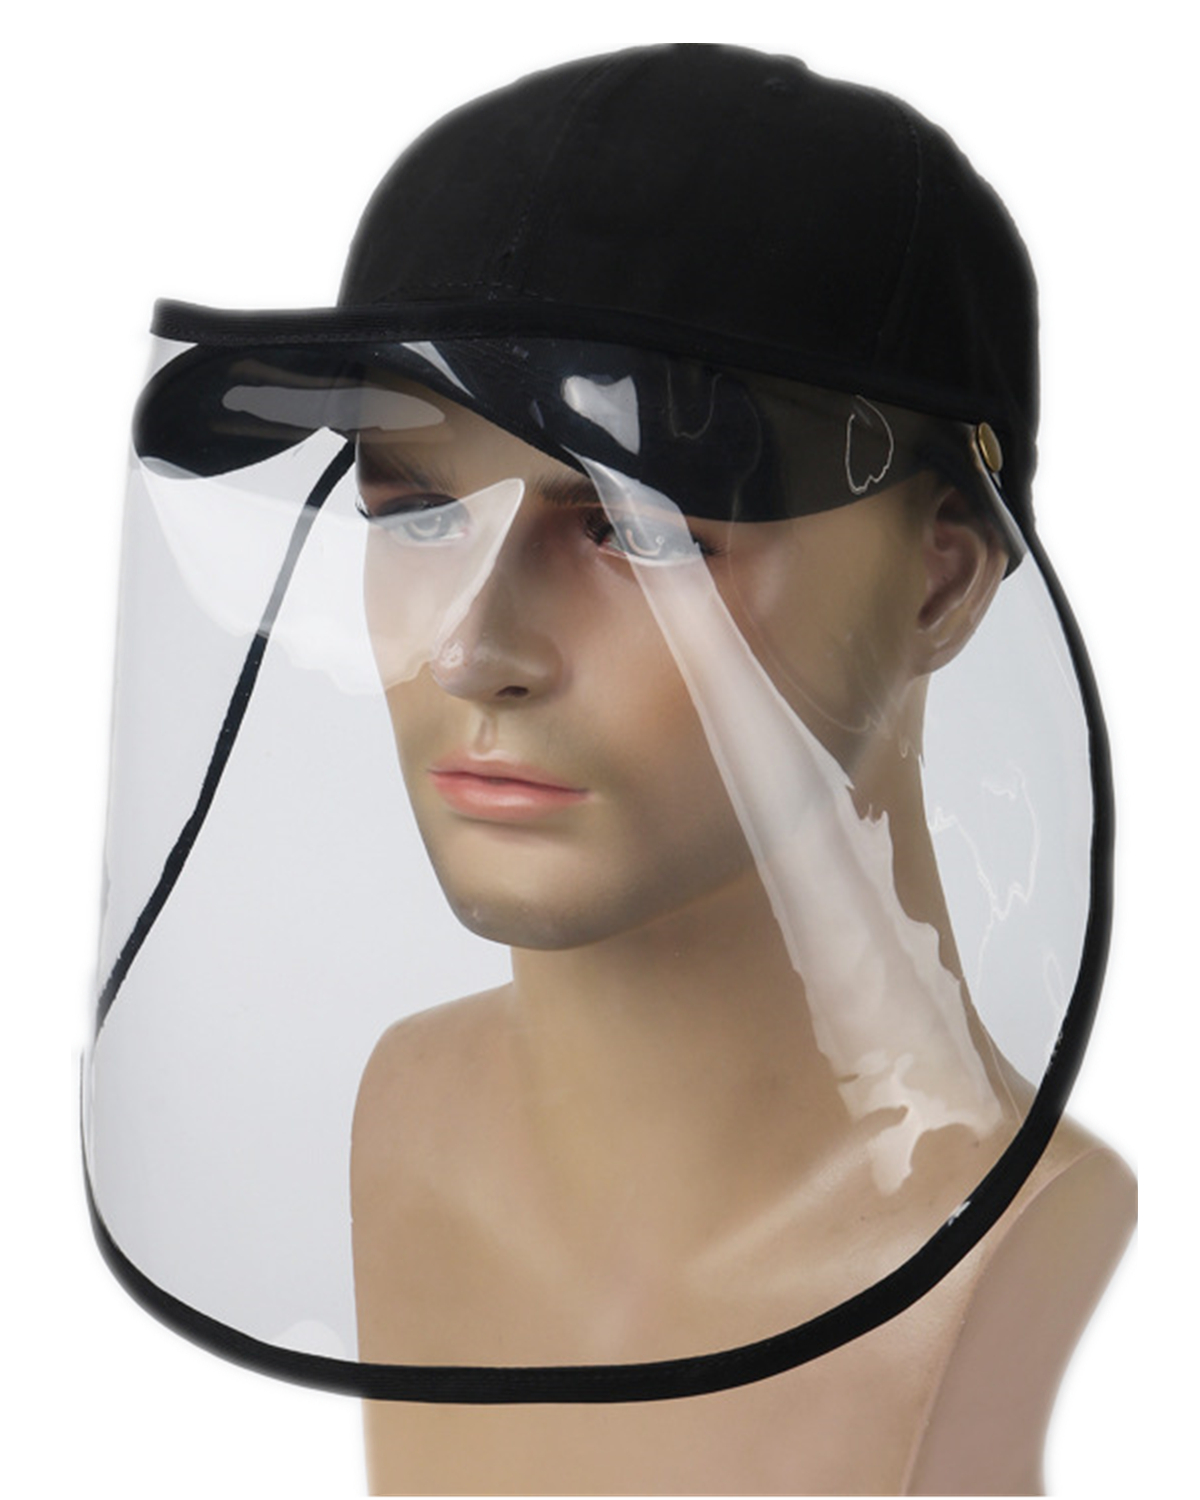 2-In1-Detachable-Double-Sides-Full-Face-Shield-with-Hat-Anti-Fog-Saliva-Dustproof-Protective-Cover-B-1670890-1